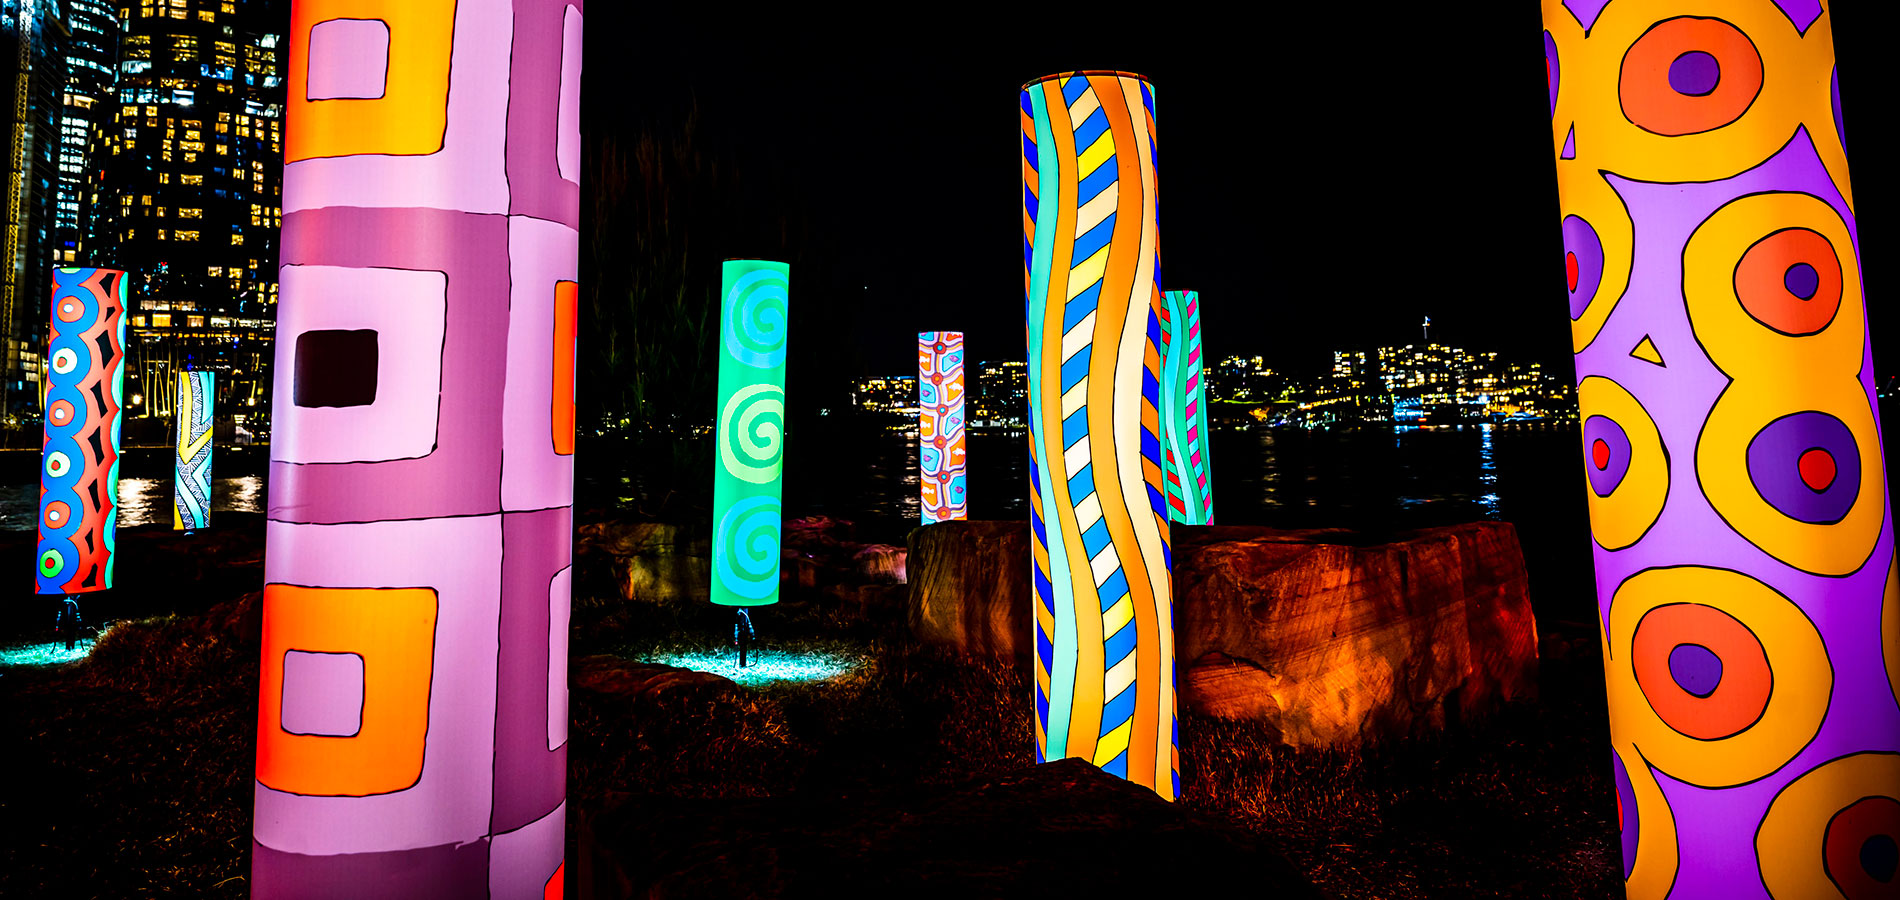 This is an image of the Nura Installation at Vivid Sydney